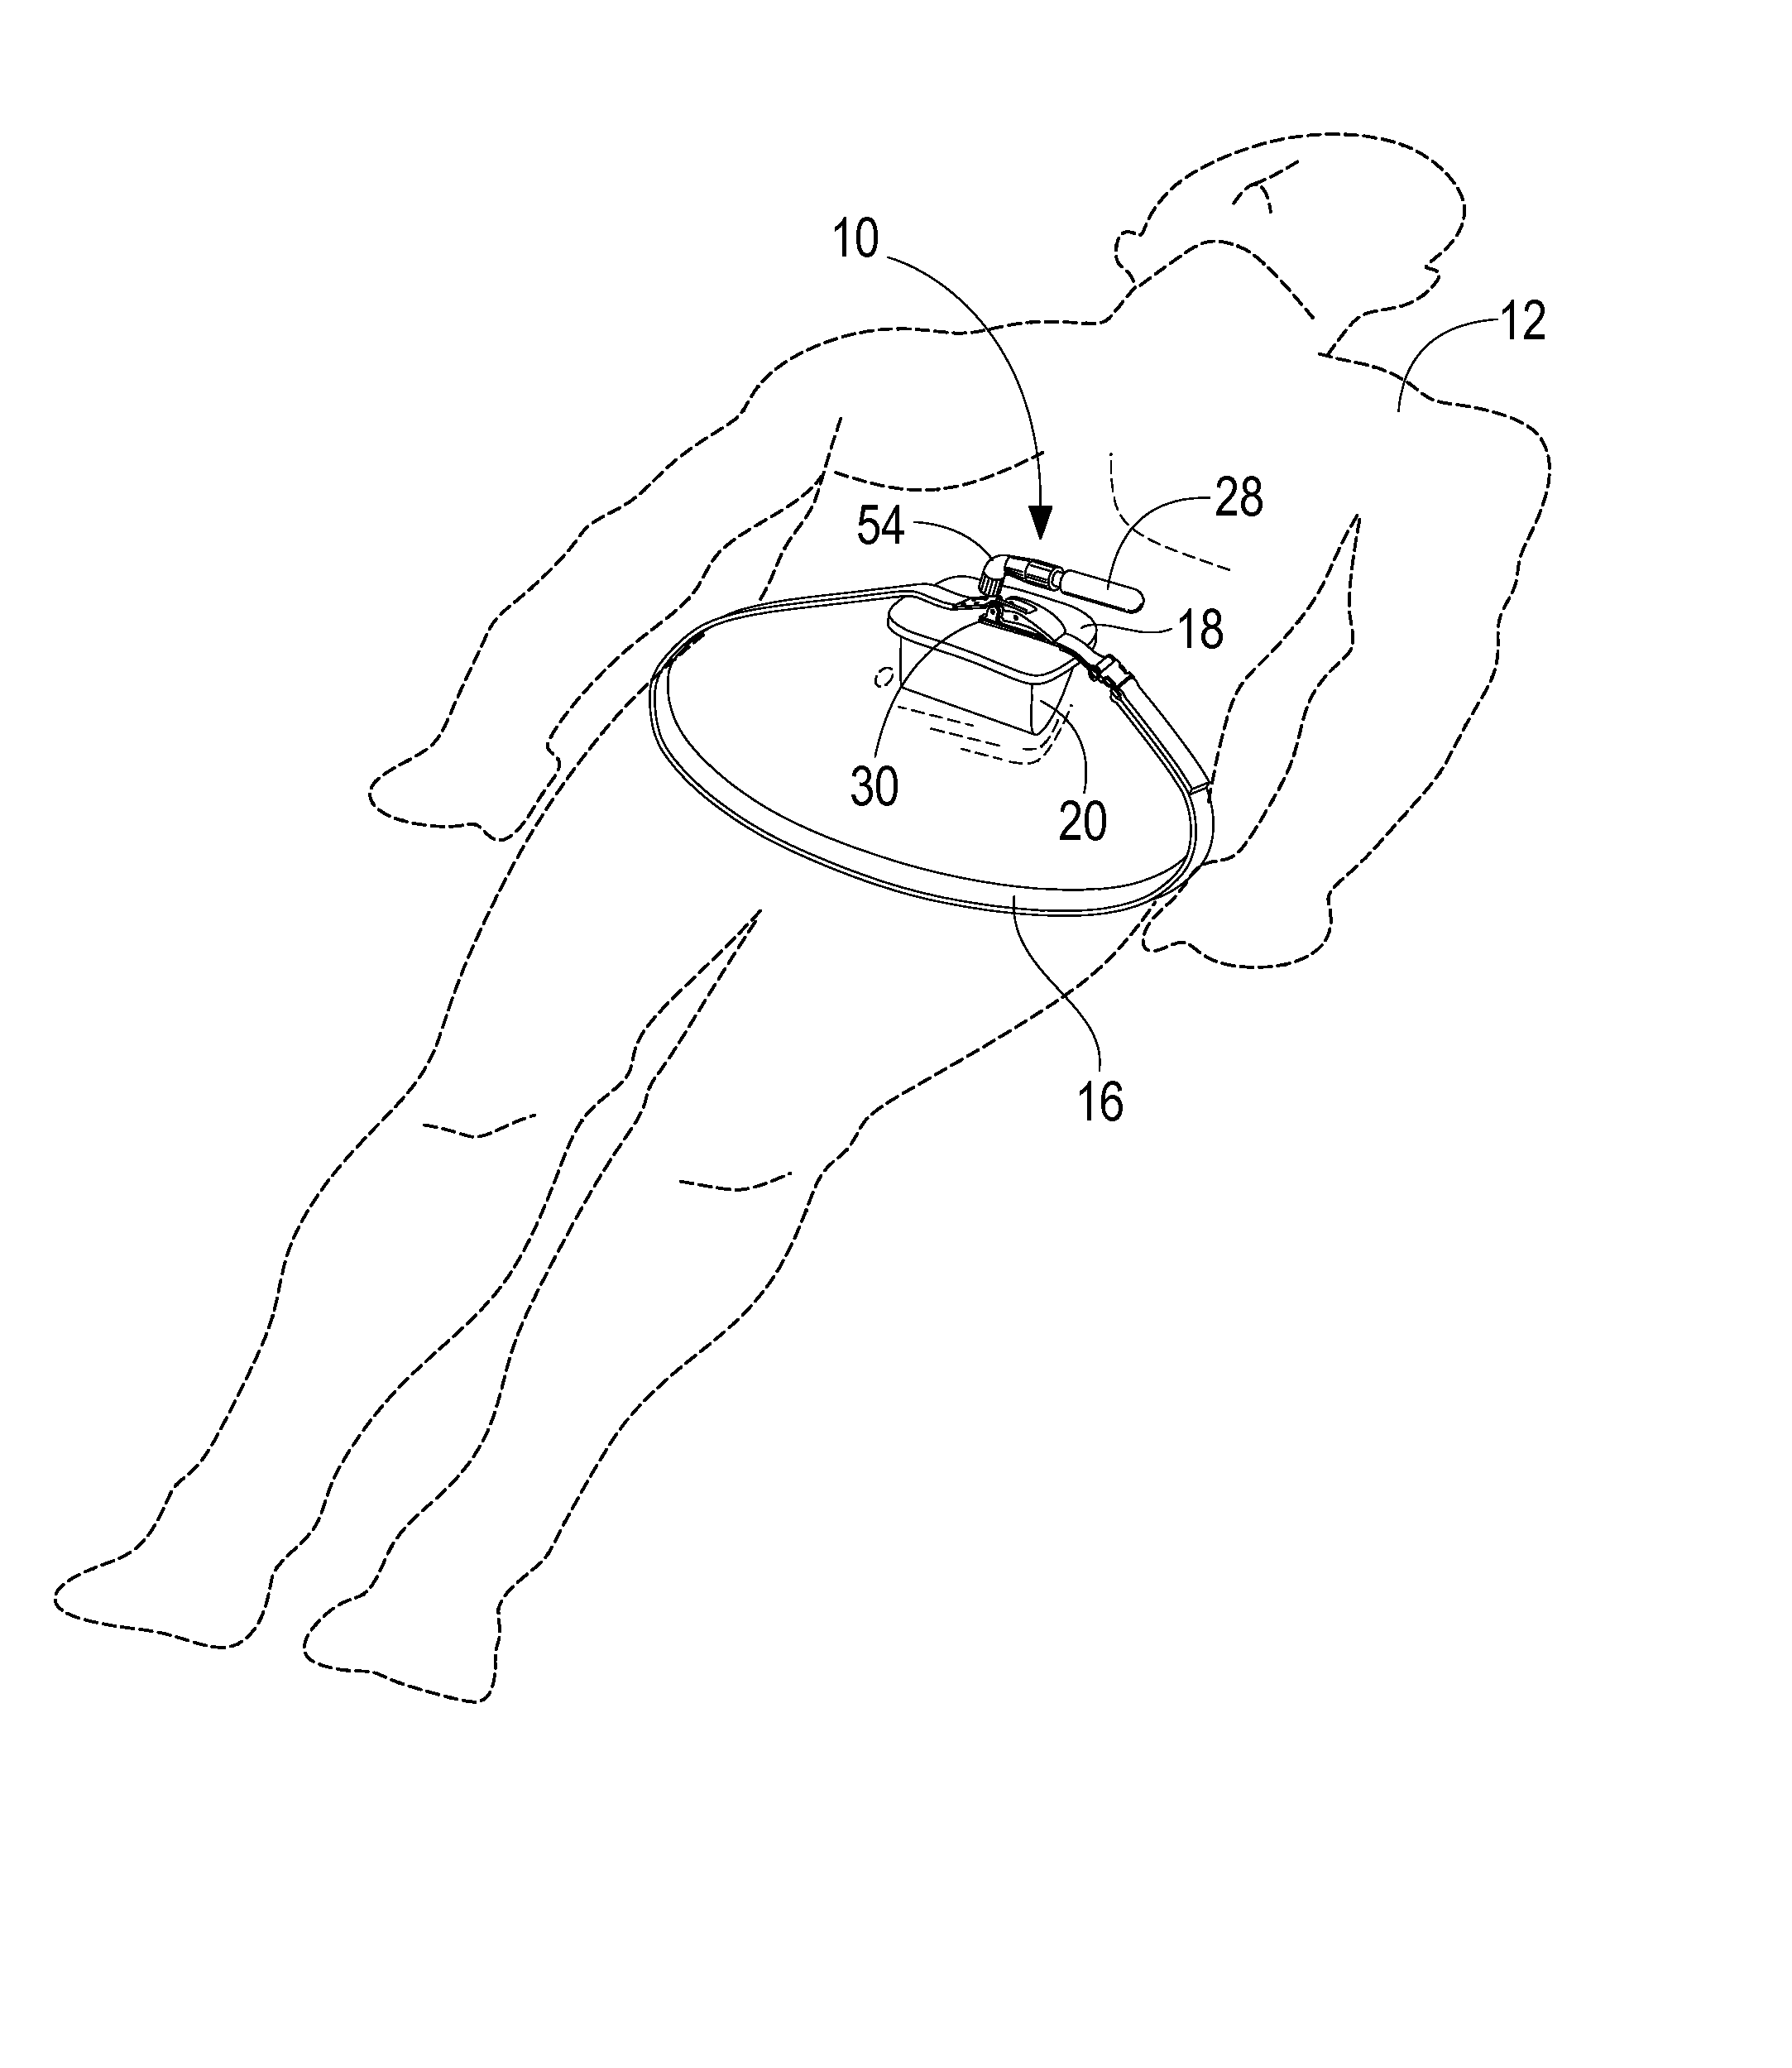 Portable pneumatic abdominal aortic tourniquet with supplemental tensioning means